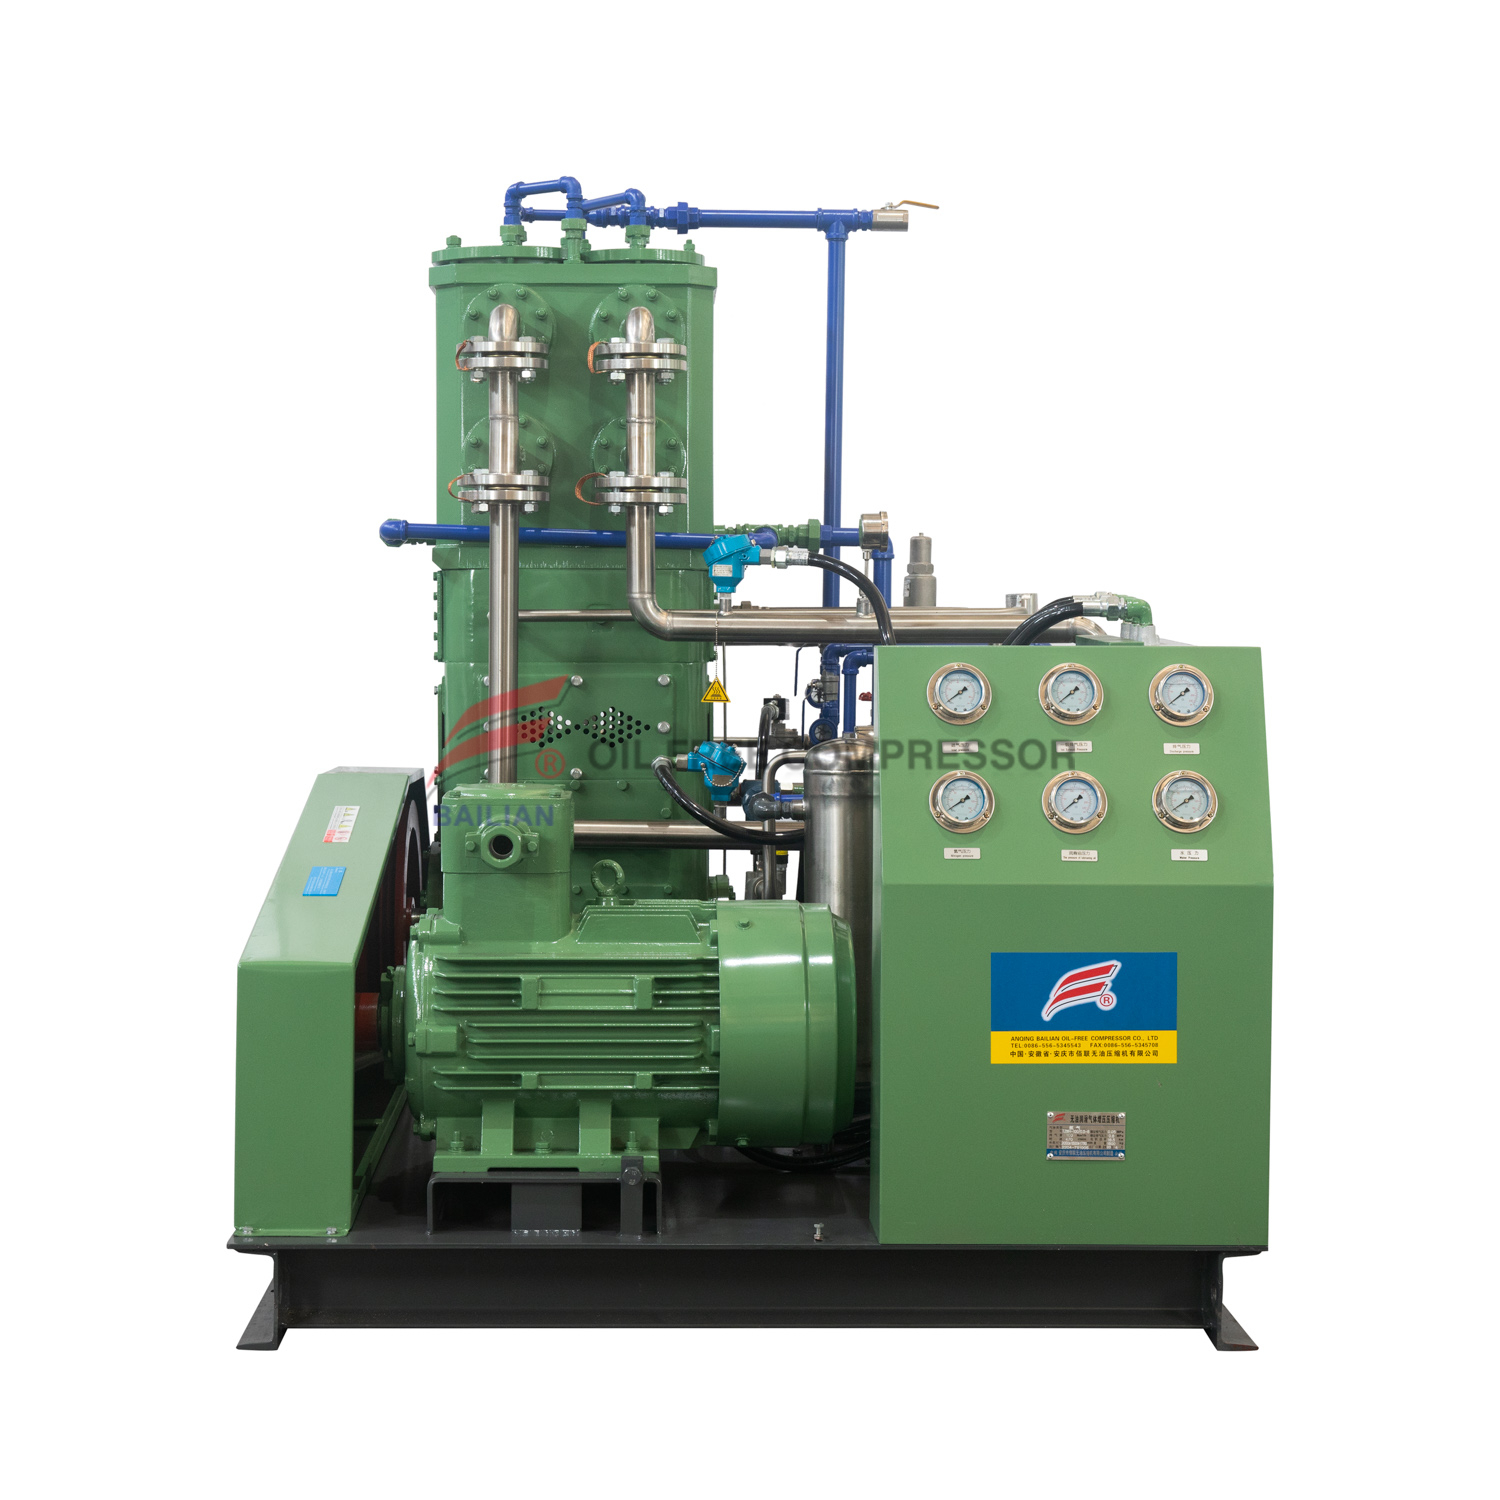 ZWHY-4200/22.5-35 Reciprocating Piston Vertical Sled Mounted Type H2 Compressor